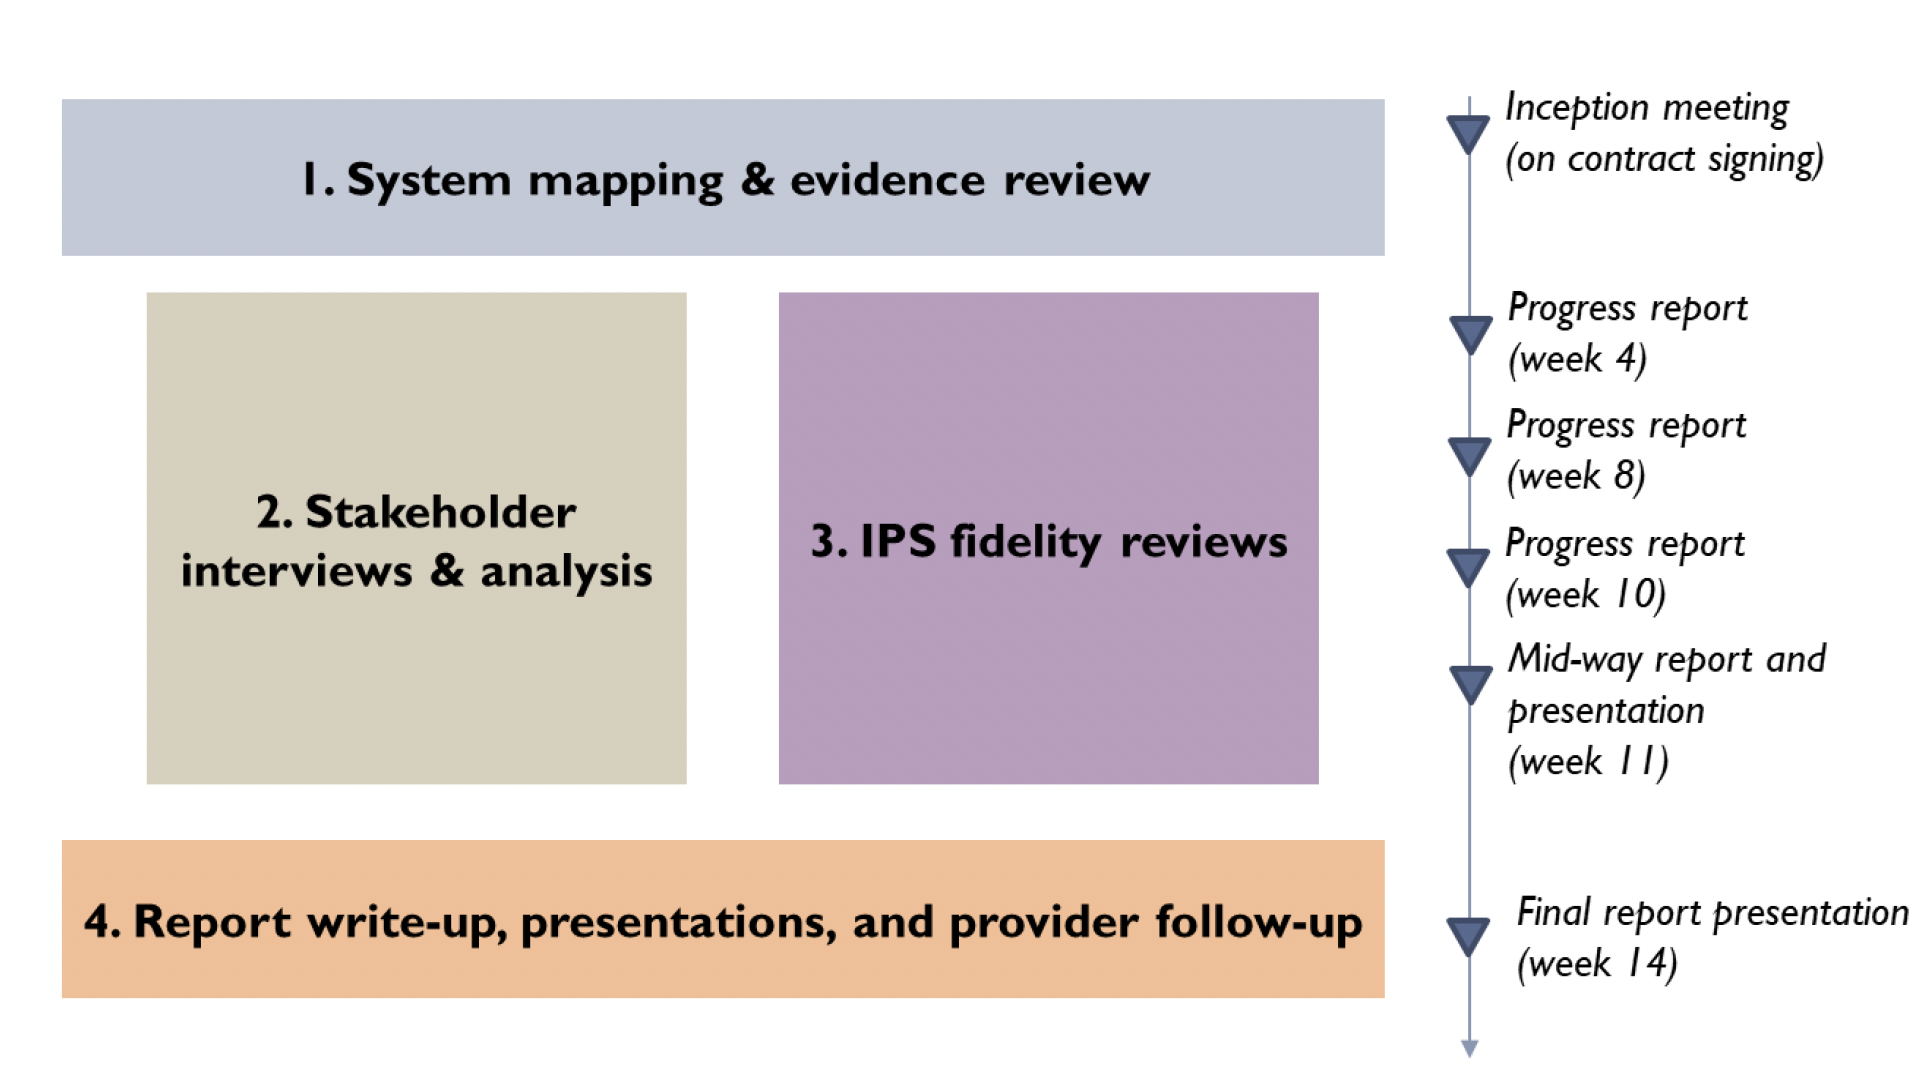 The four-step methodology is listed, with timeline for progress reports on right side.